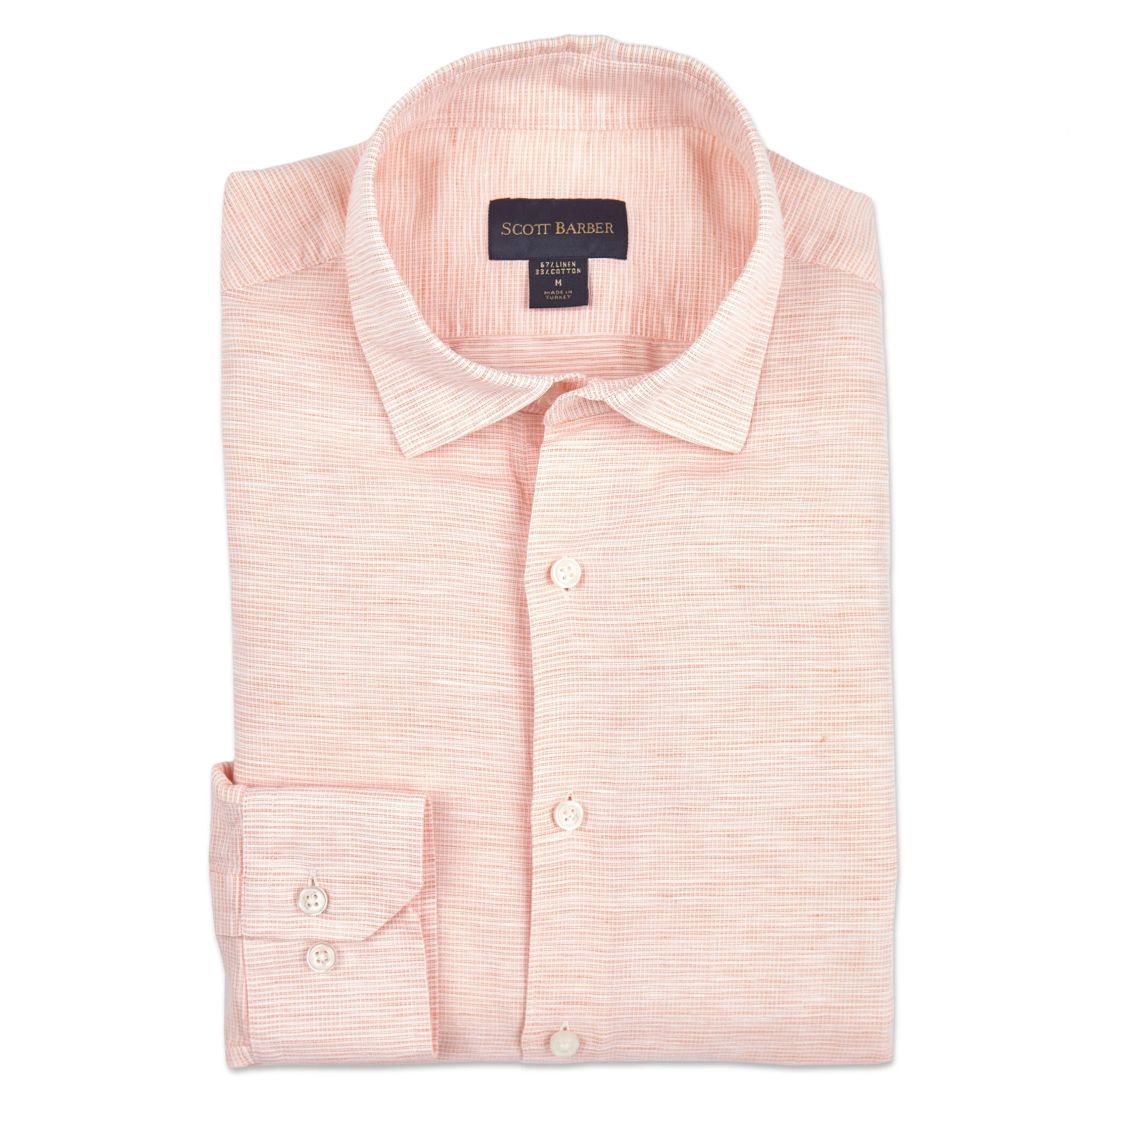 Linen and Cotton Barre Sport Shirt in Apricot by Scott Barber